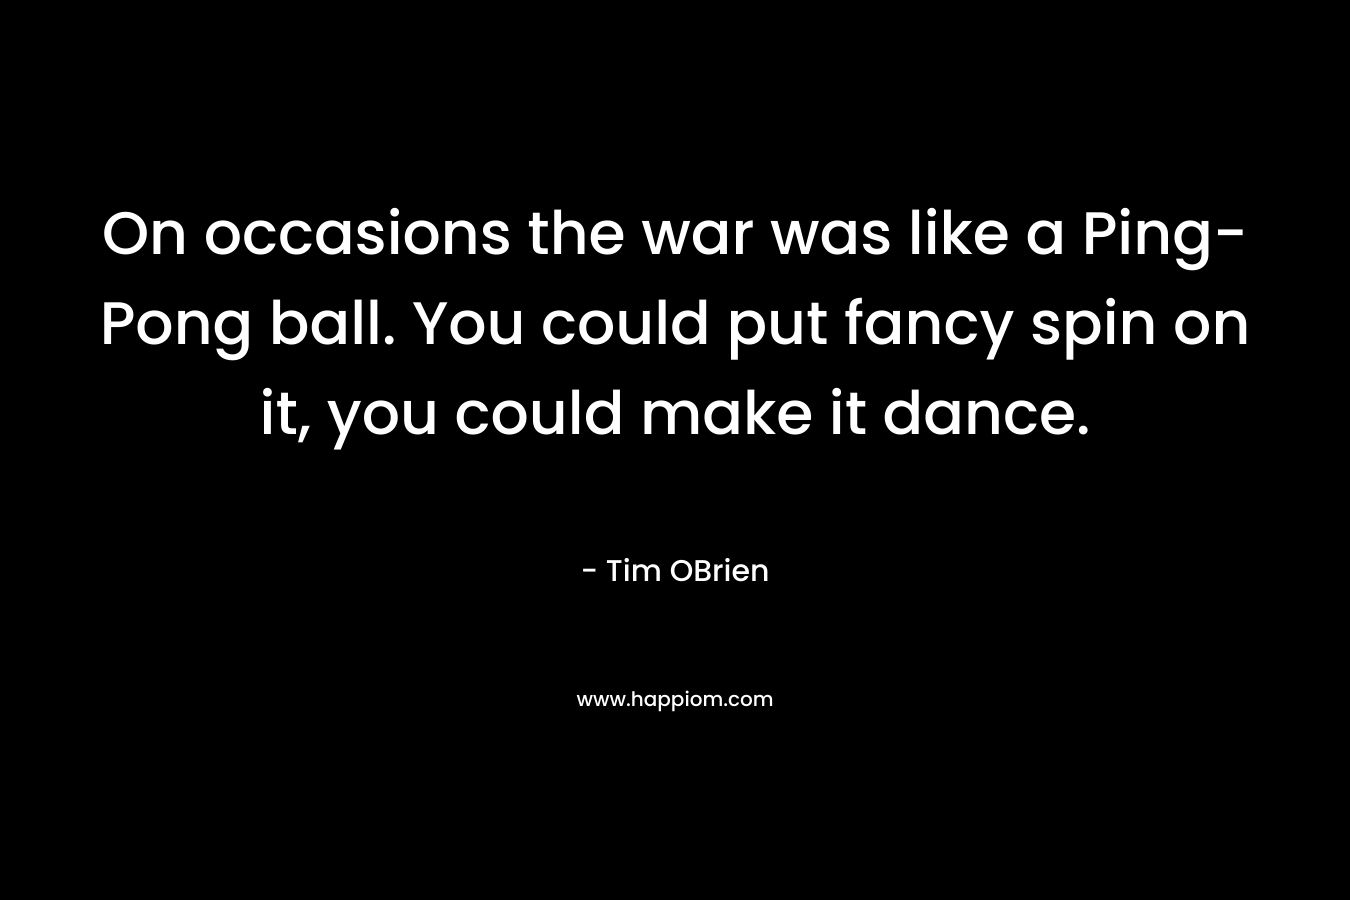 On occasions the war was like a Ping-Pong ball. You could put fancy spin on it, you could make it dance. – Tim OBrien